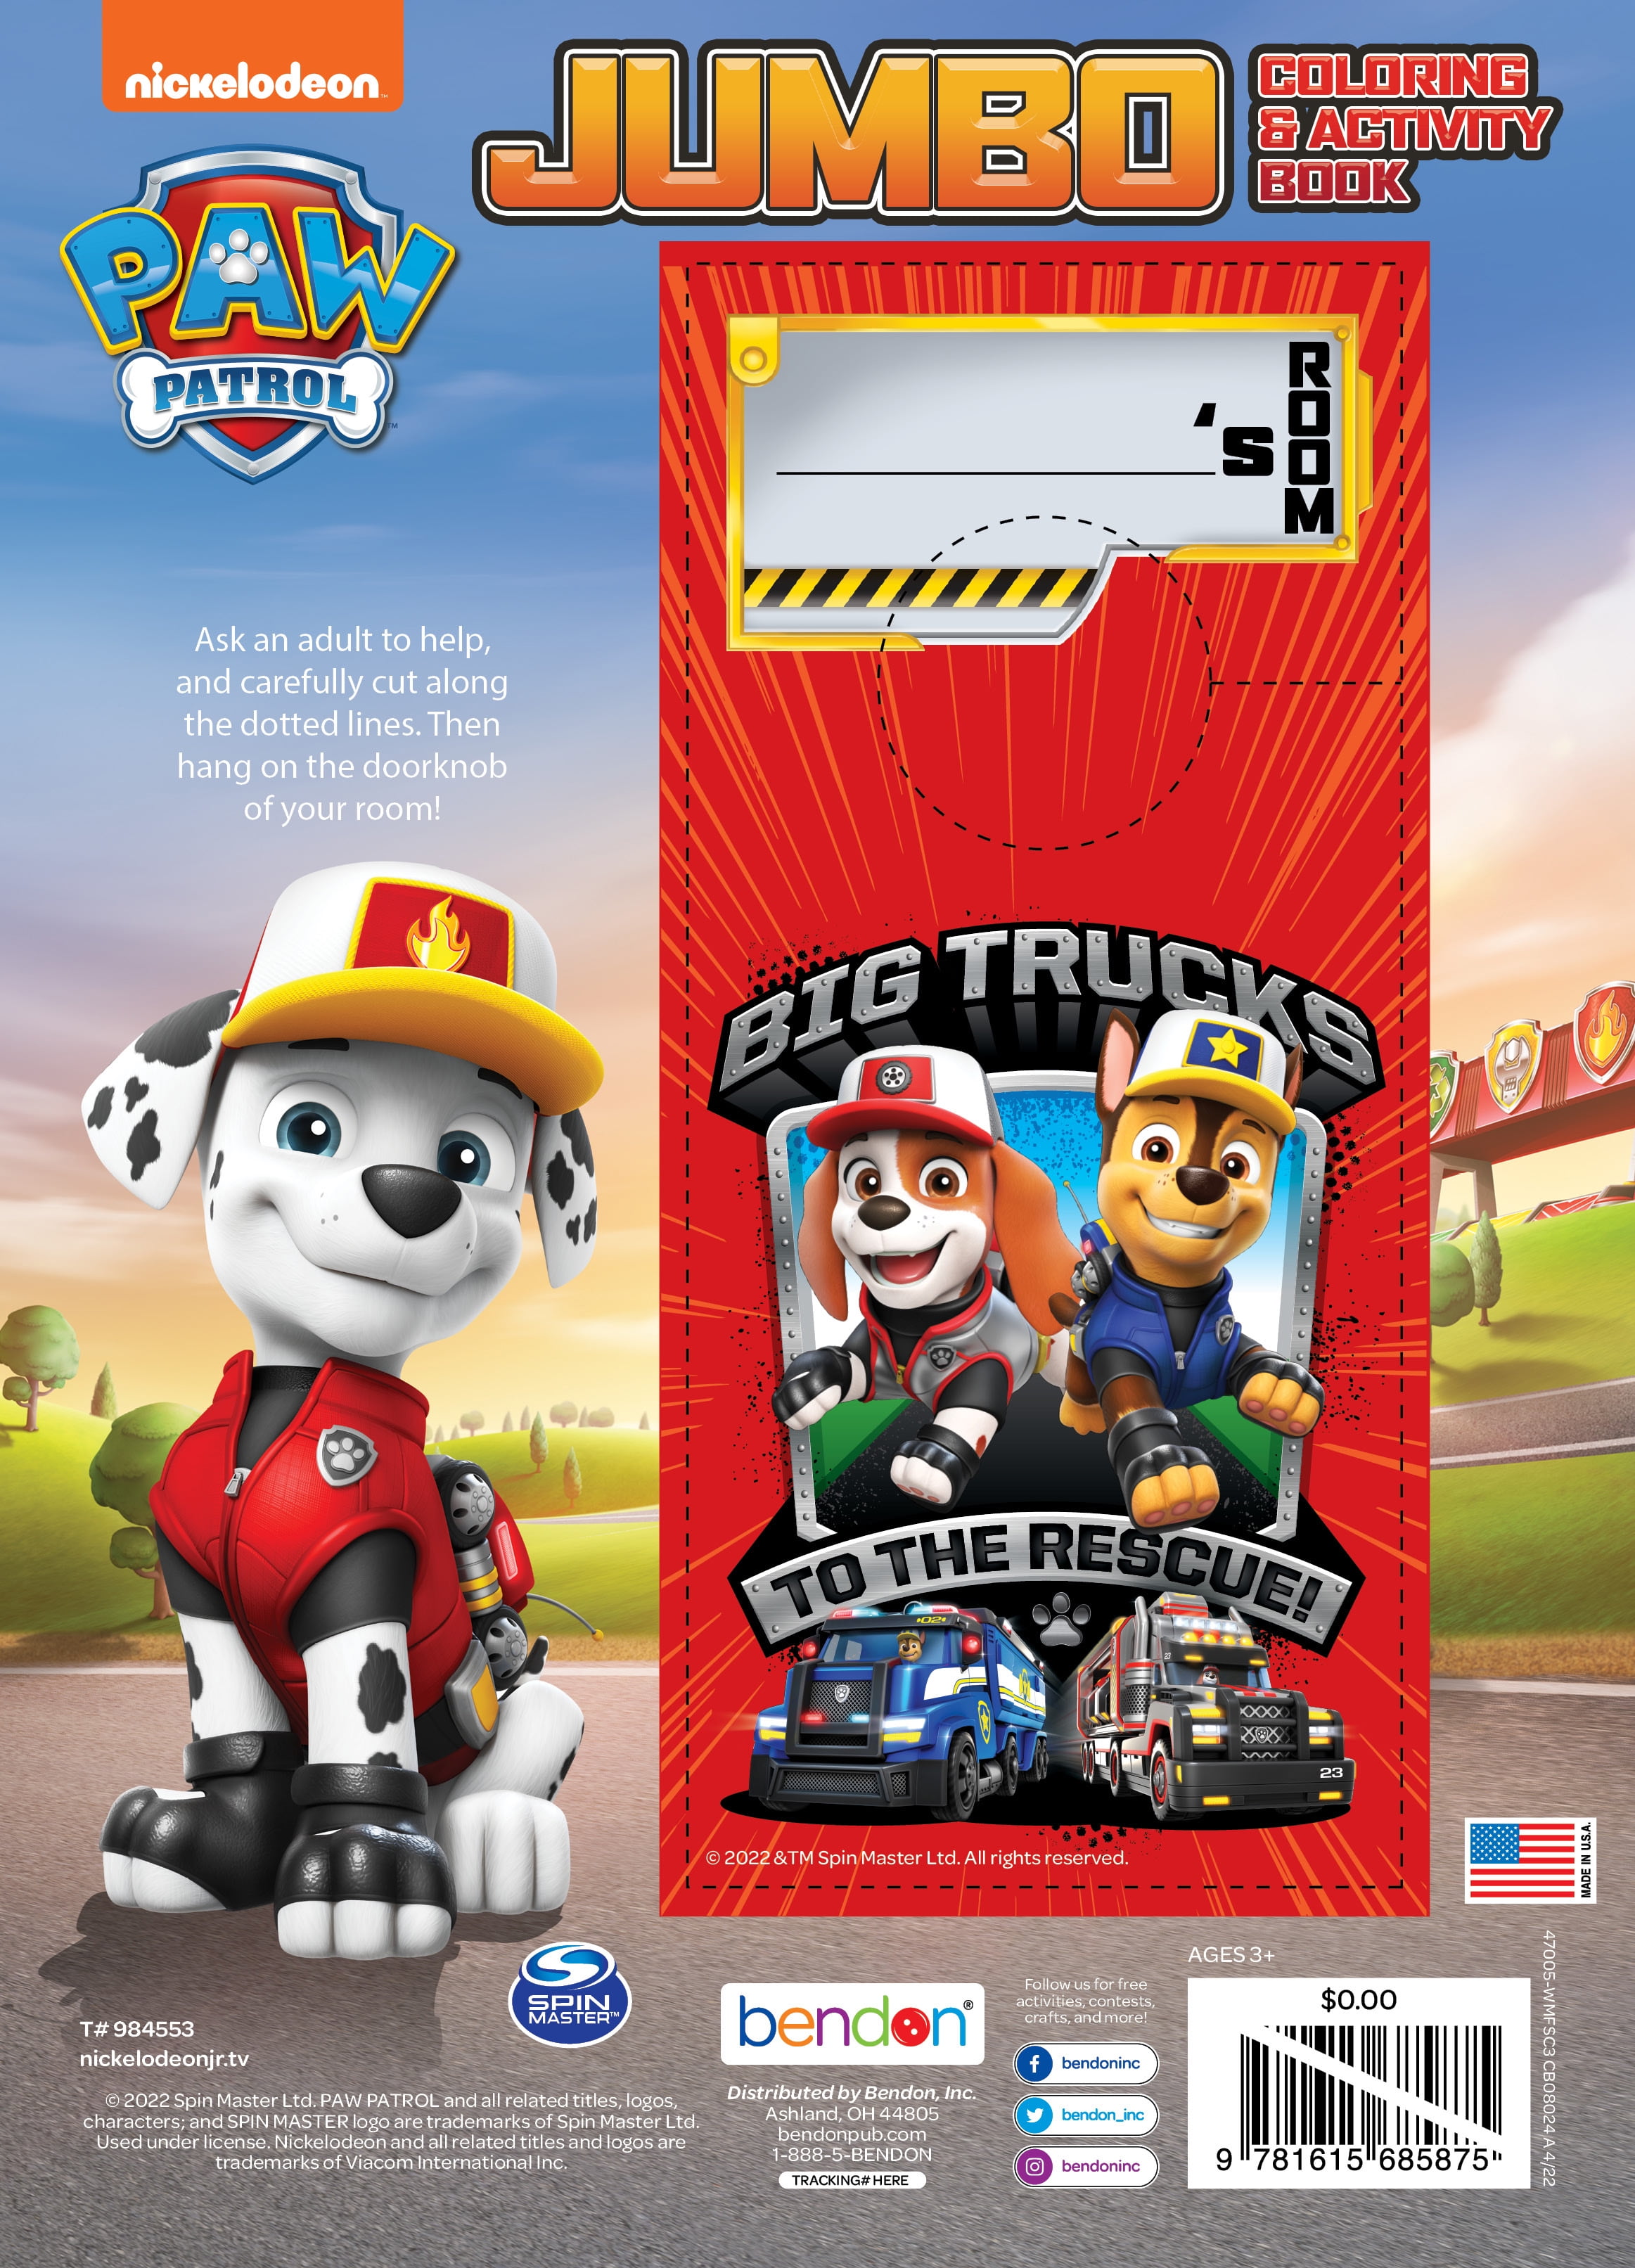 Paw Patrol Coloring Book: Paw Patrol Jumbo Coloring Book For Kids Ages 4-8,  With Premium Images by Holiday House